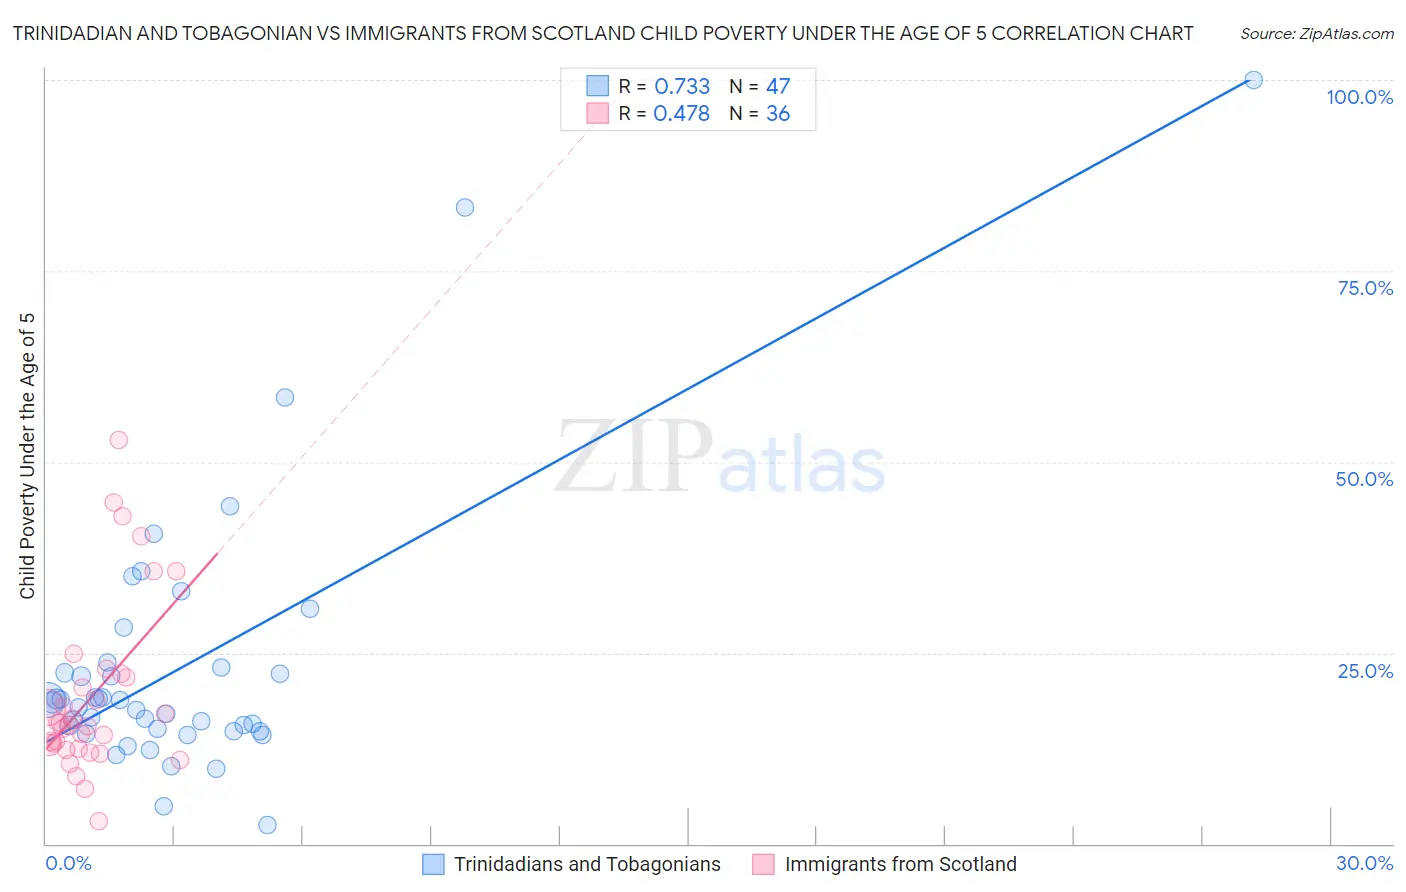 Trinidadian and Tobagonian vs Immigrants from Scotland Child Poverty Under the Age of 5